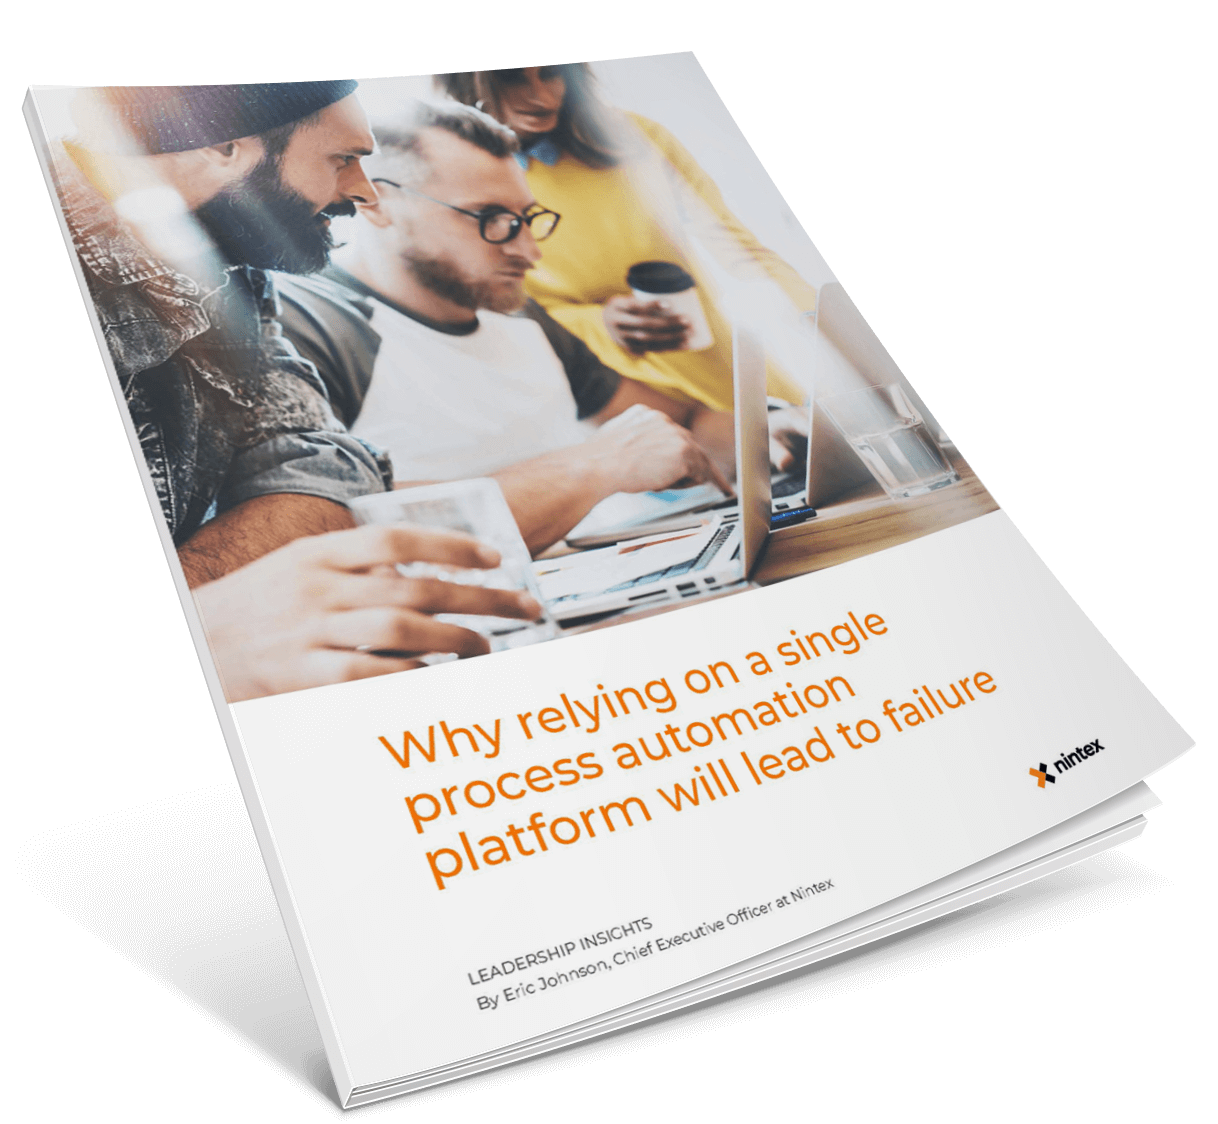 Why relying on a single process automation platform will lead to failure